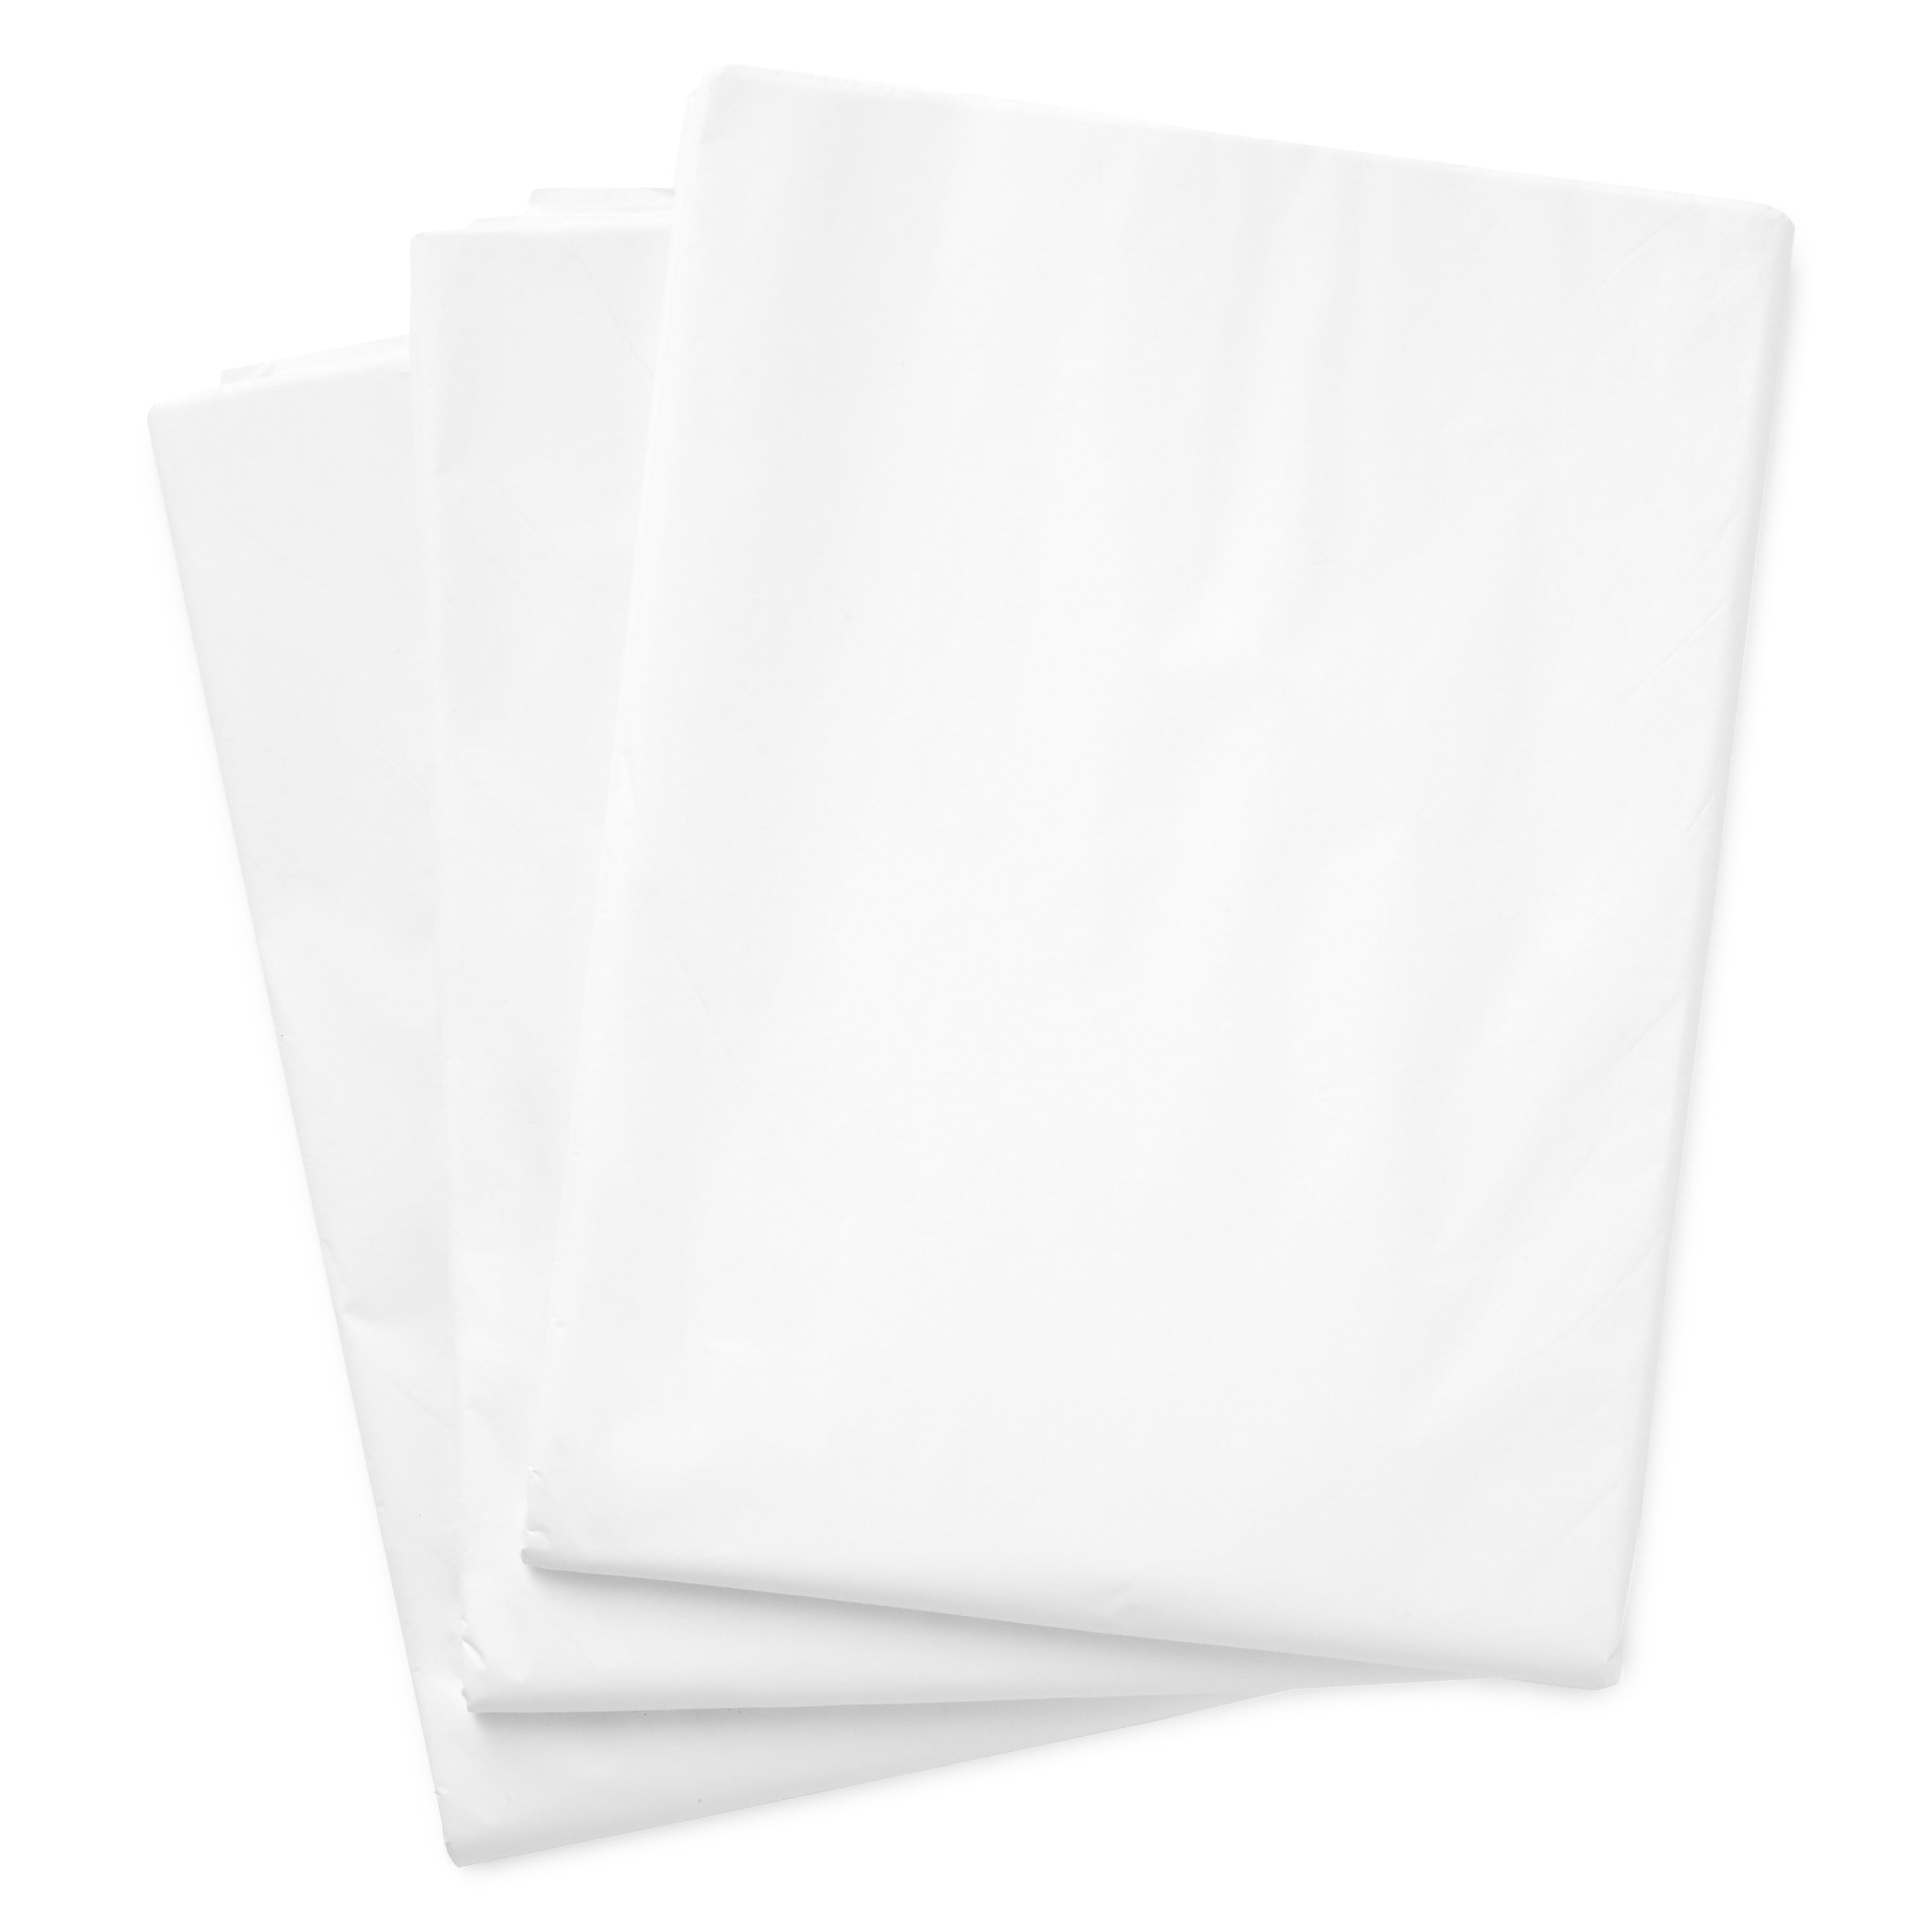 100 SHEETS OF WHITE ACID FREE TISSUE PAPER 450x700mm 